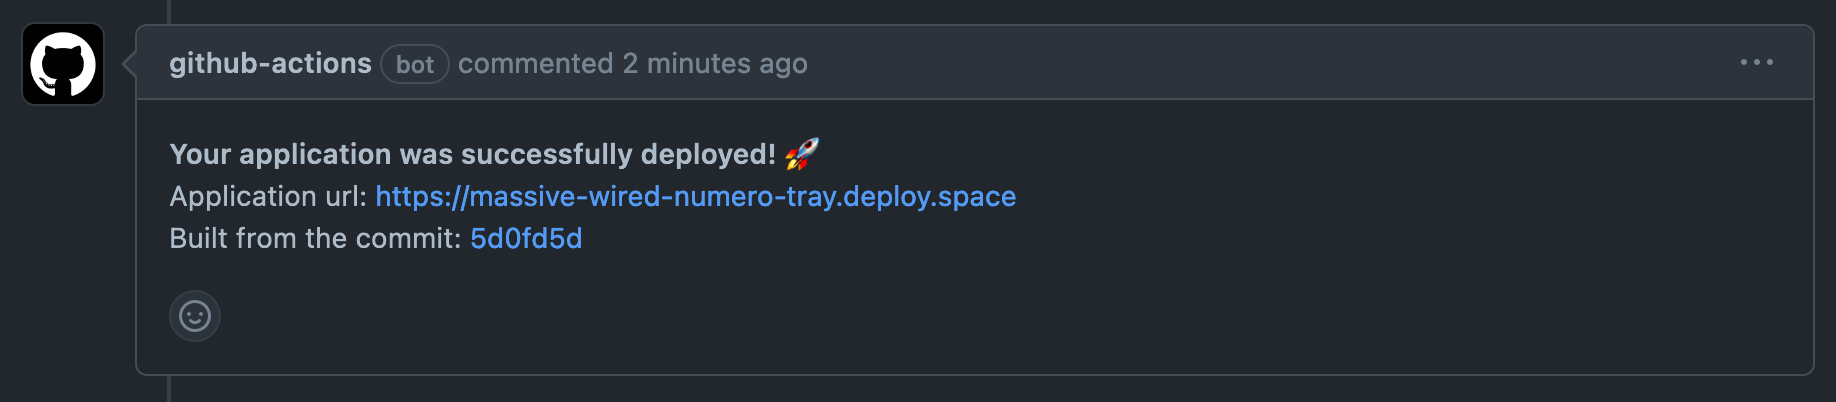 Screenshot of a deployed preview app comment on a GitHub pull request